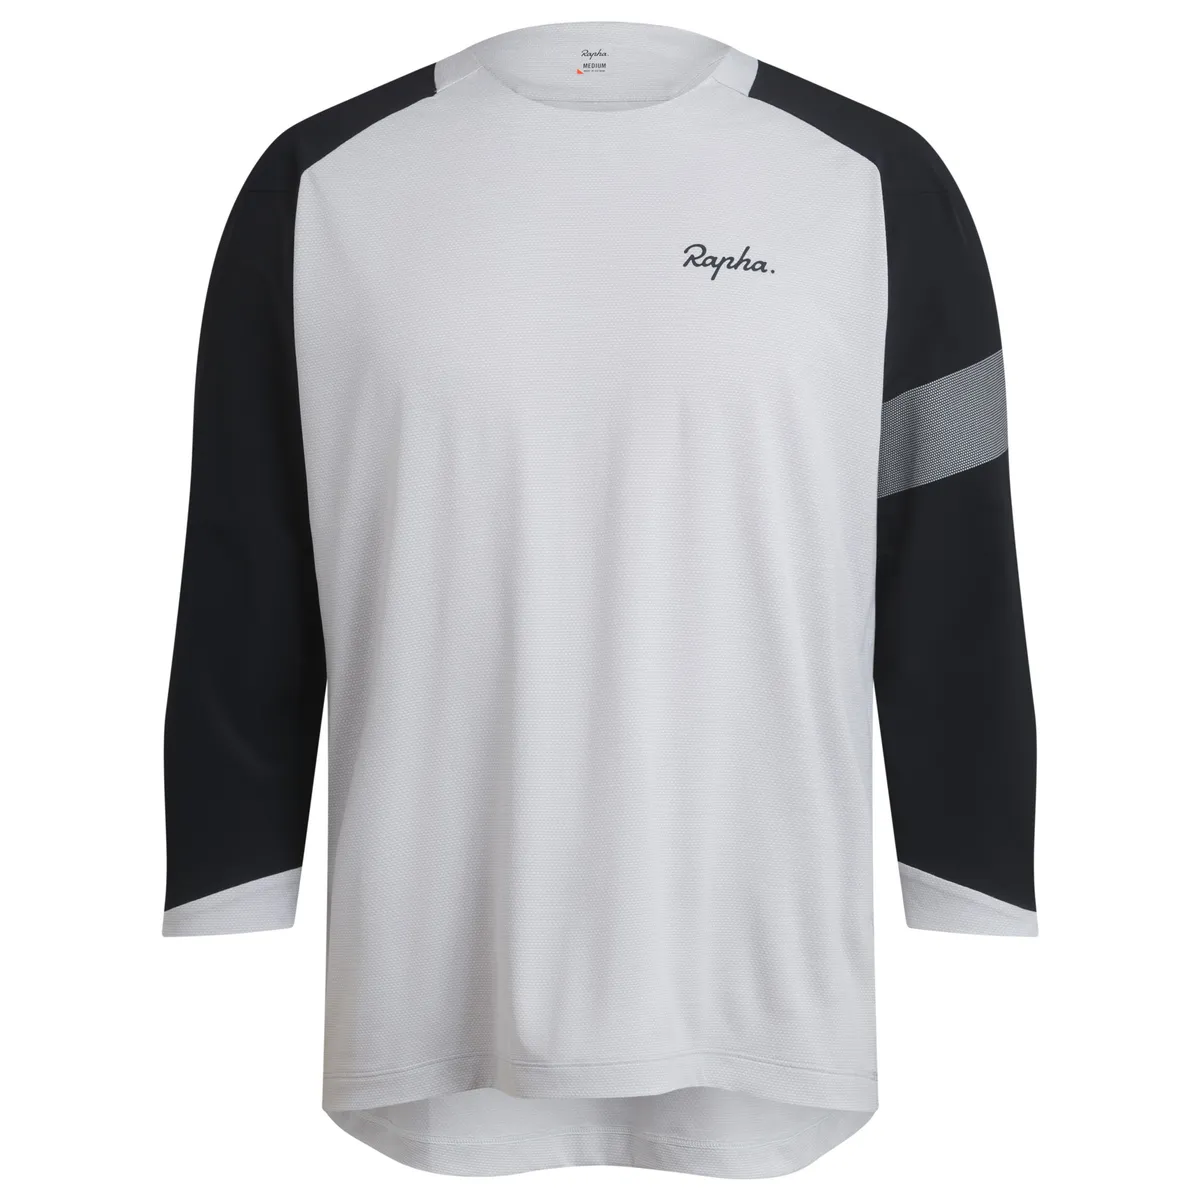 Rapha Trail ¾ Sleeve Jersey in Micro Chip and Anthracite